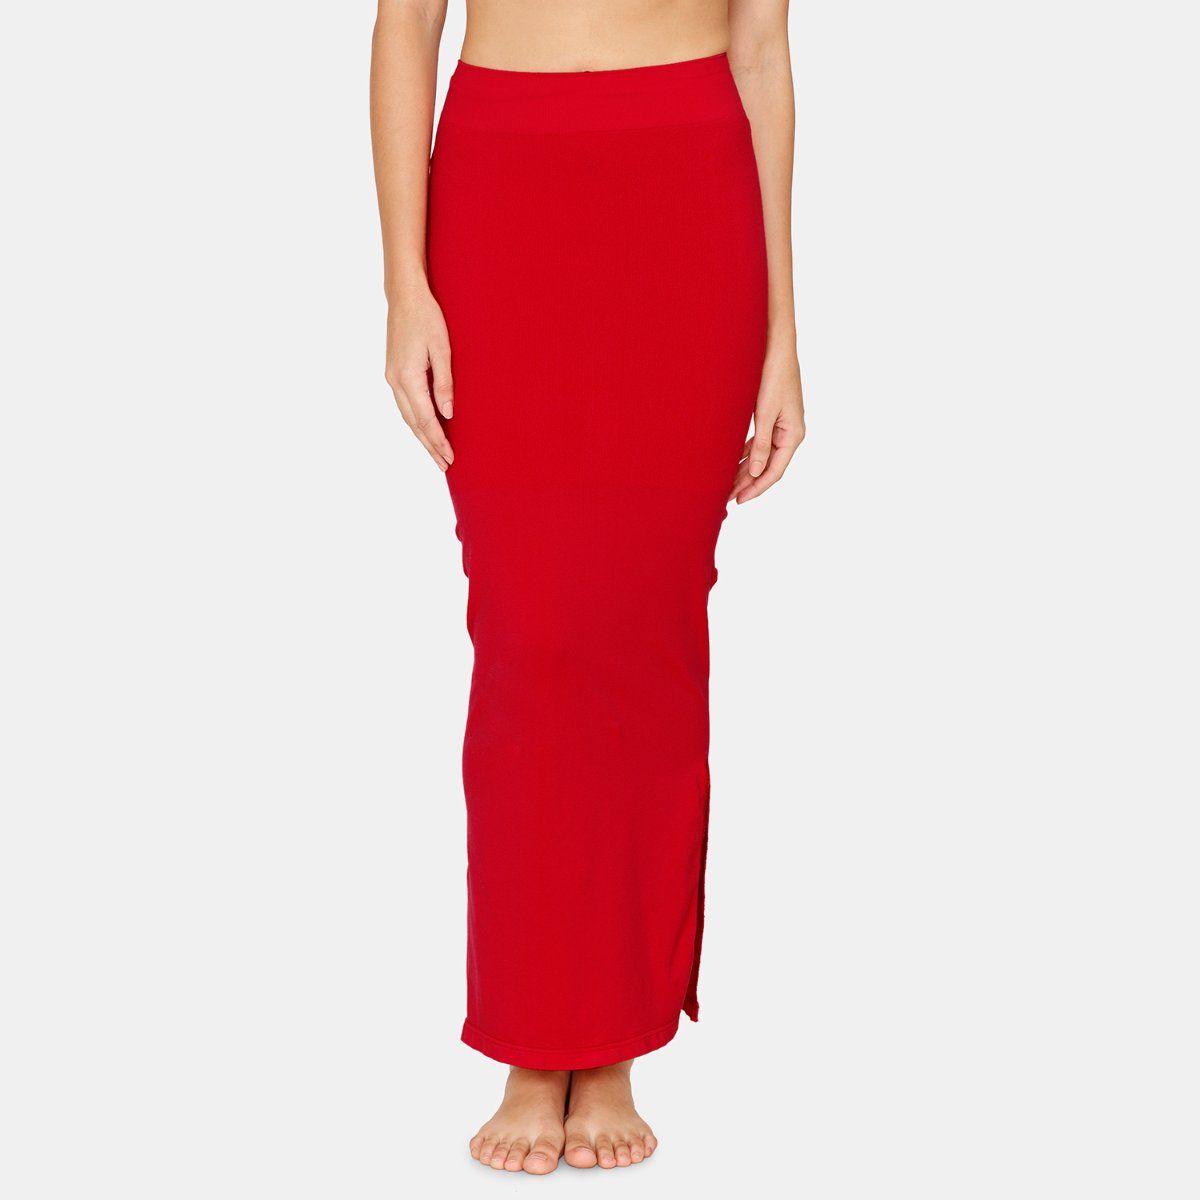 Zivame Seamless All Day Mermaid Saree Shapewear With Removable Drawcord -  Tango Red (S)